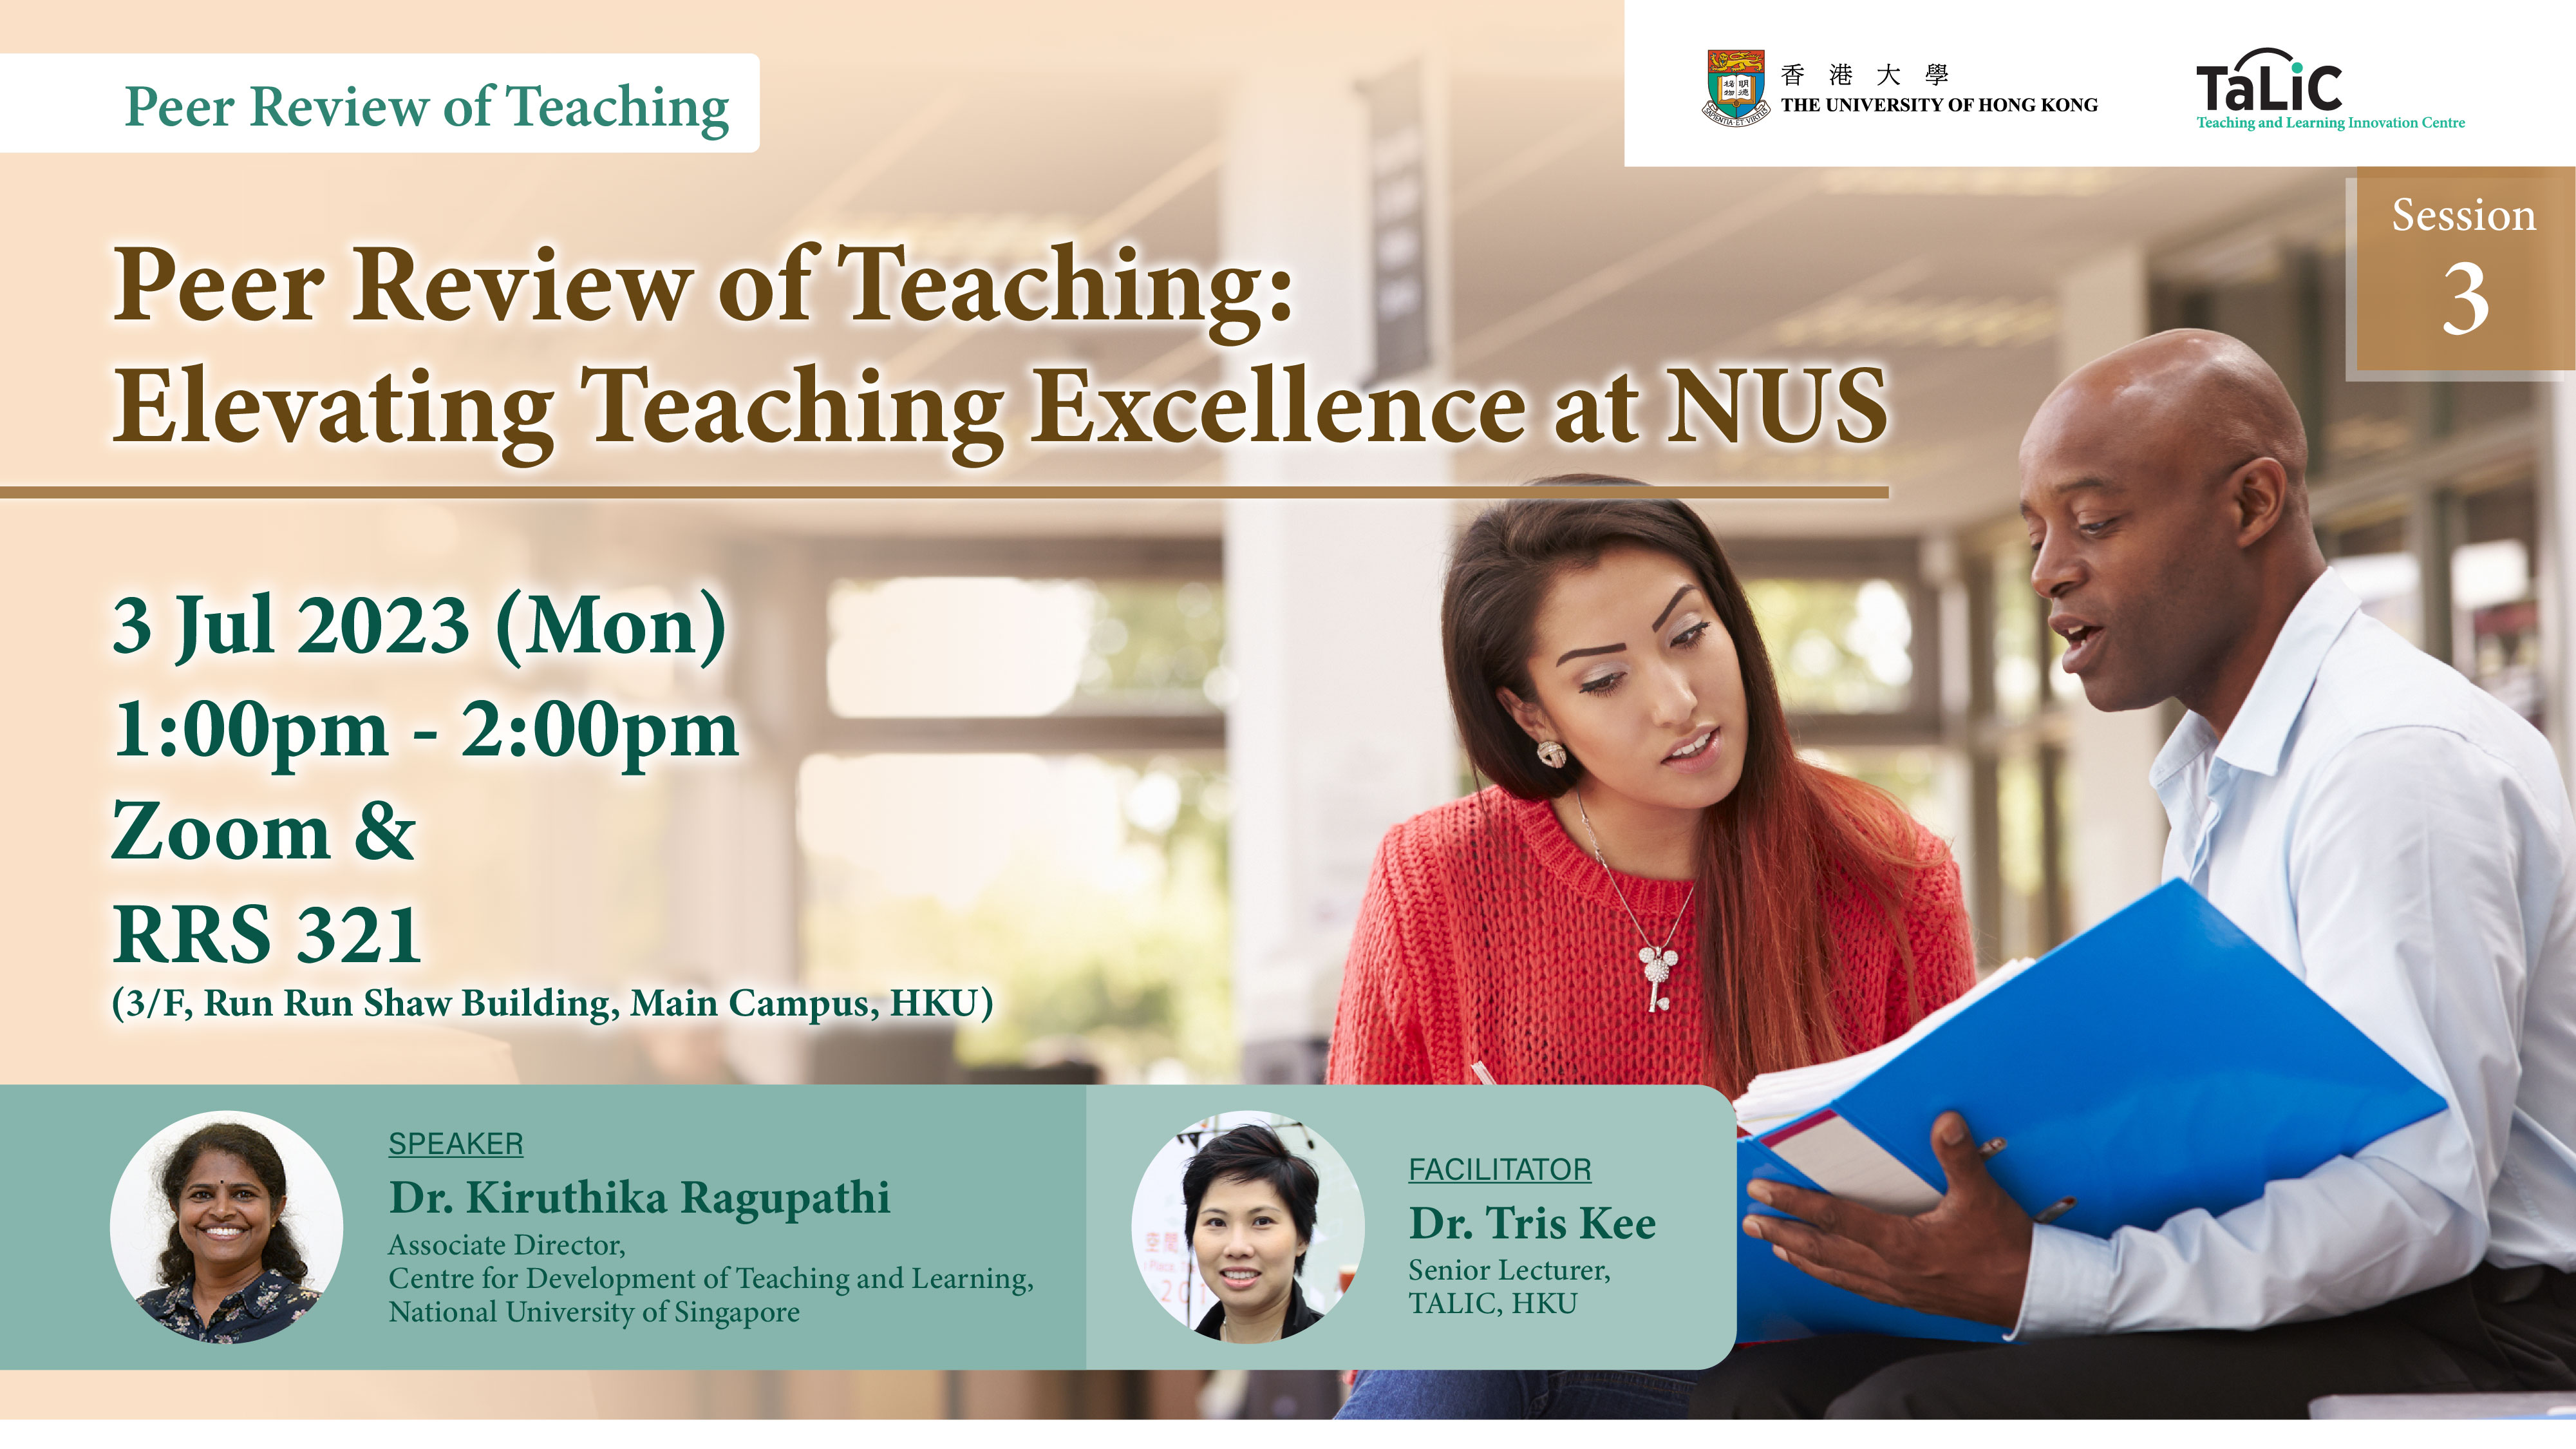 Session 3 | Peer Review of Teaching: Elevating Teaching Excellence at NUS